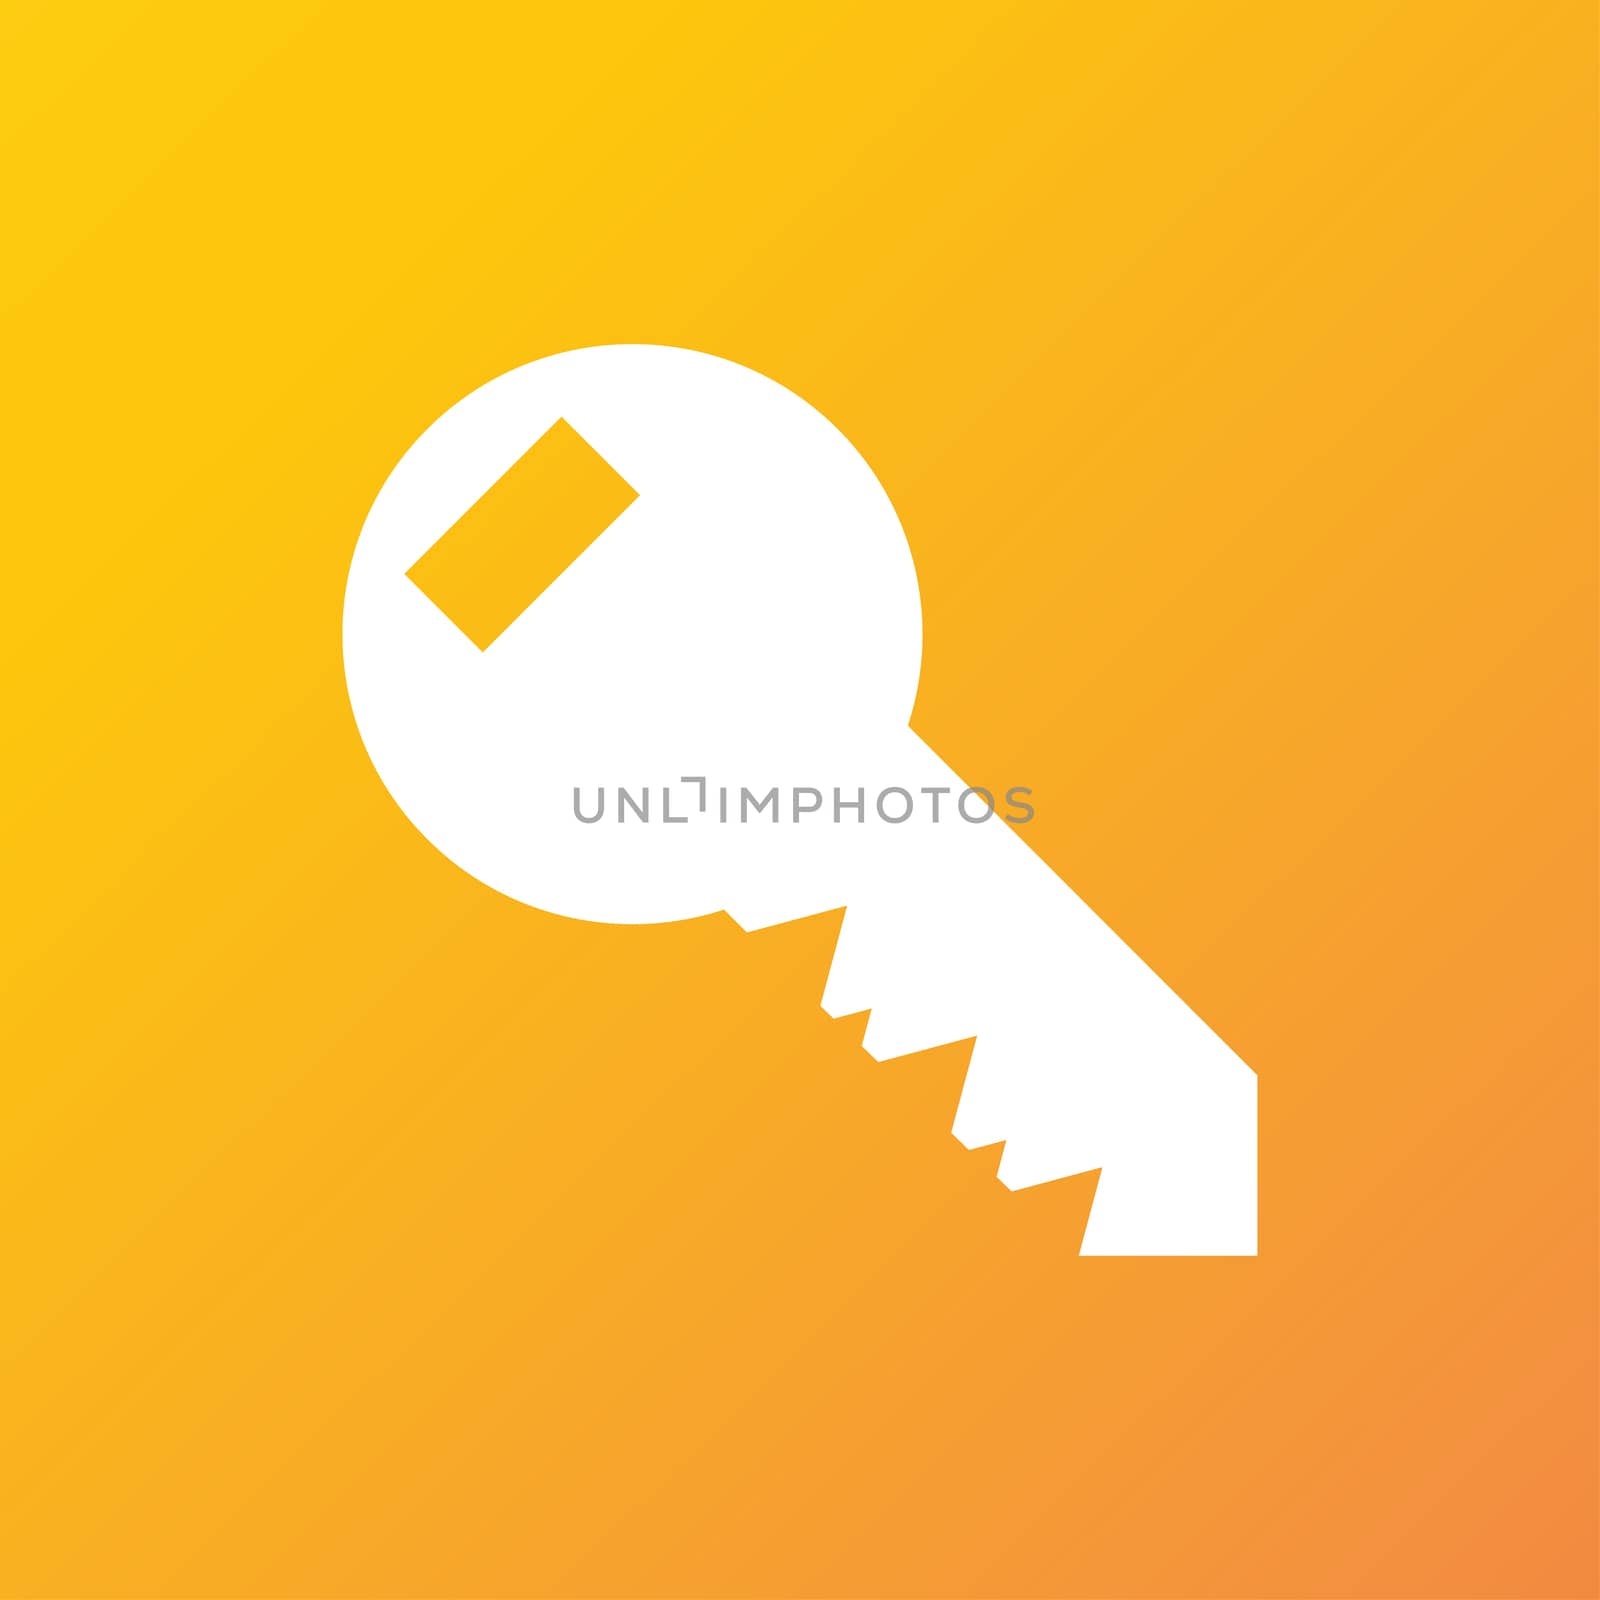 Key icon symbol Flat modern web design with long shadow and space for your text. illustration